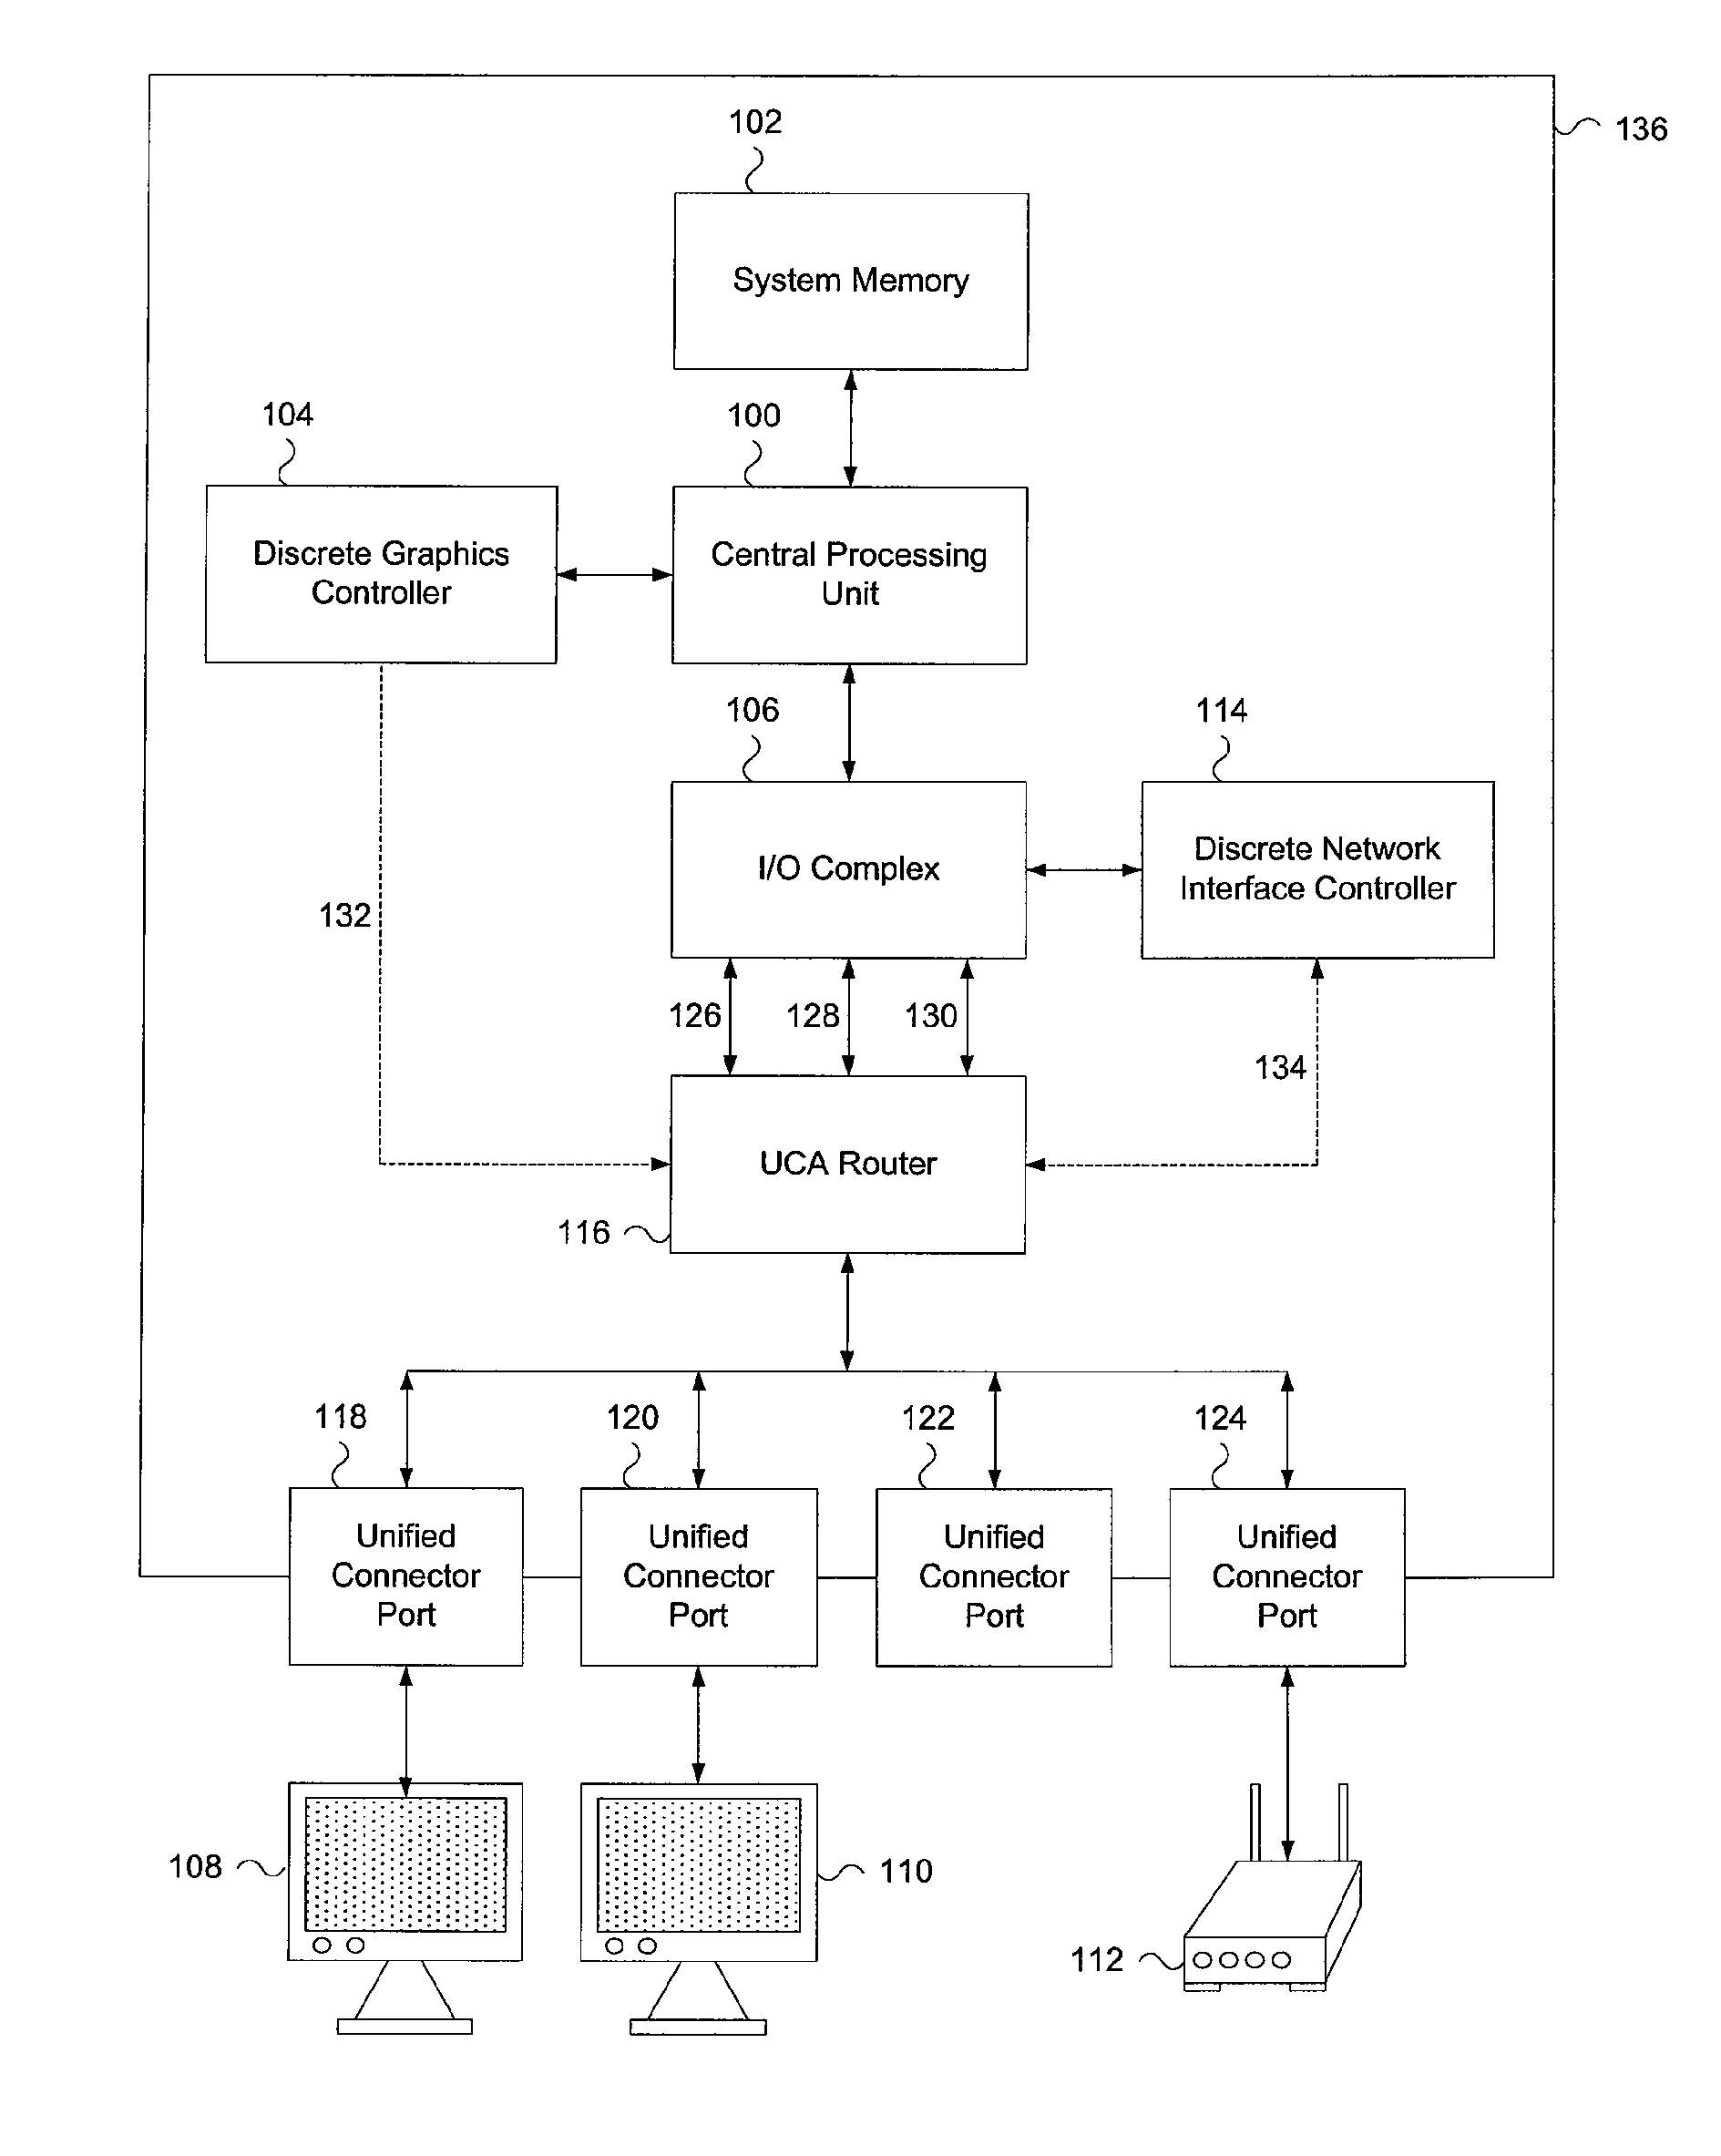 Unified connector architecture